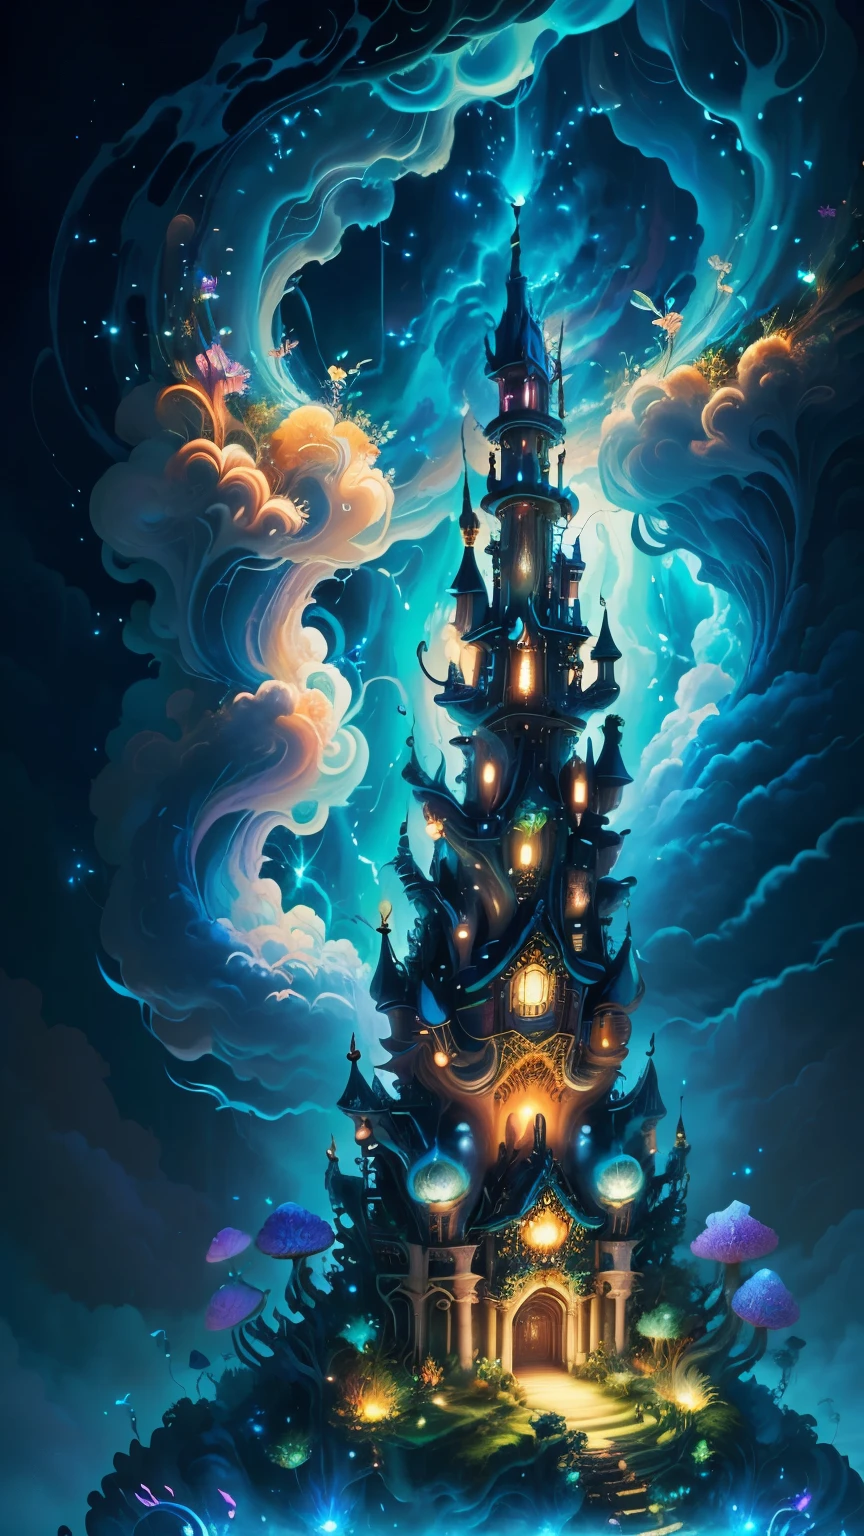 masterpiece, best quality, high castle,(Swirling clouds and colorful flowers), (forest fireflies fantasy korean mushroom castle kingdom), (midnight), (Irregular), (mysterious), (ridiculous), dreamy, disney, t shirt design, vector,